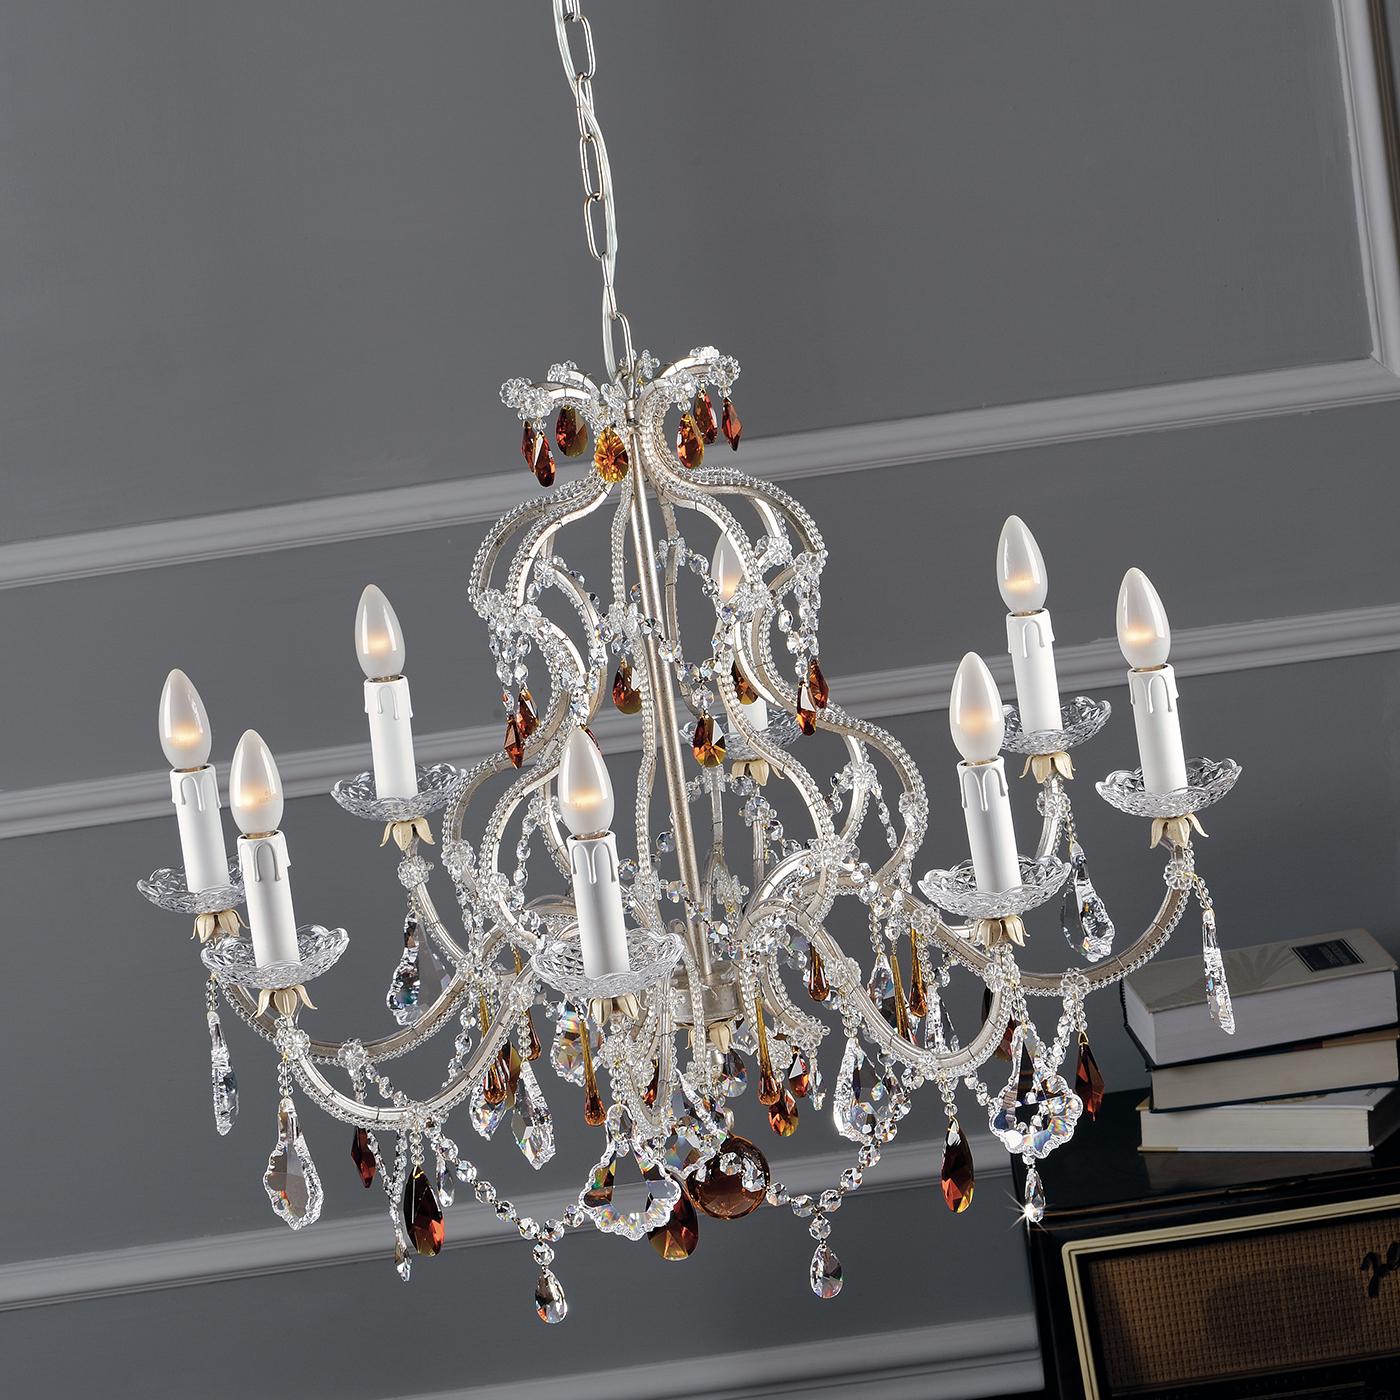 Assembled entirely by hand, this unique chandelier blends traditional and modern accents to perfection. With eight gently curving arms, the silver leaf chandelier is accented with glass pearls and crystals, both transparent and amber-colored.